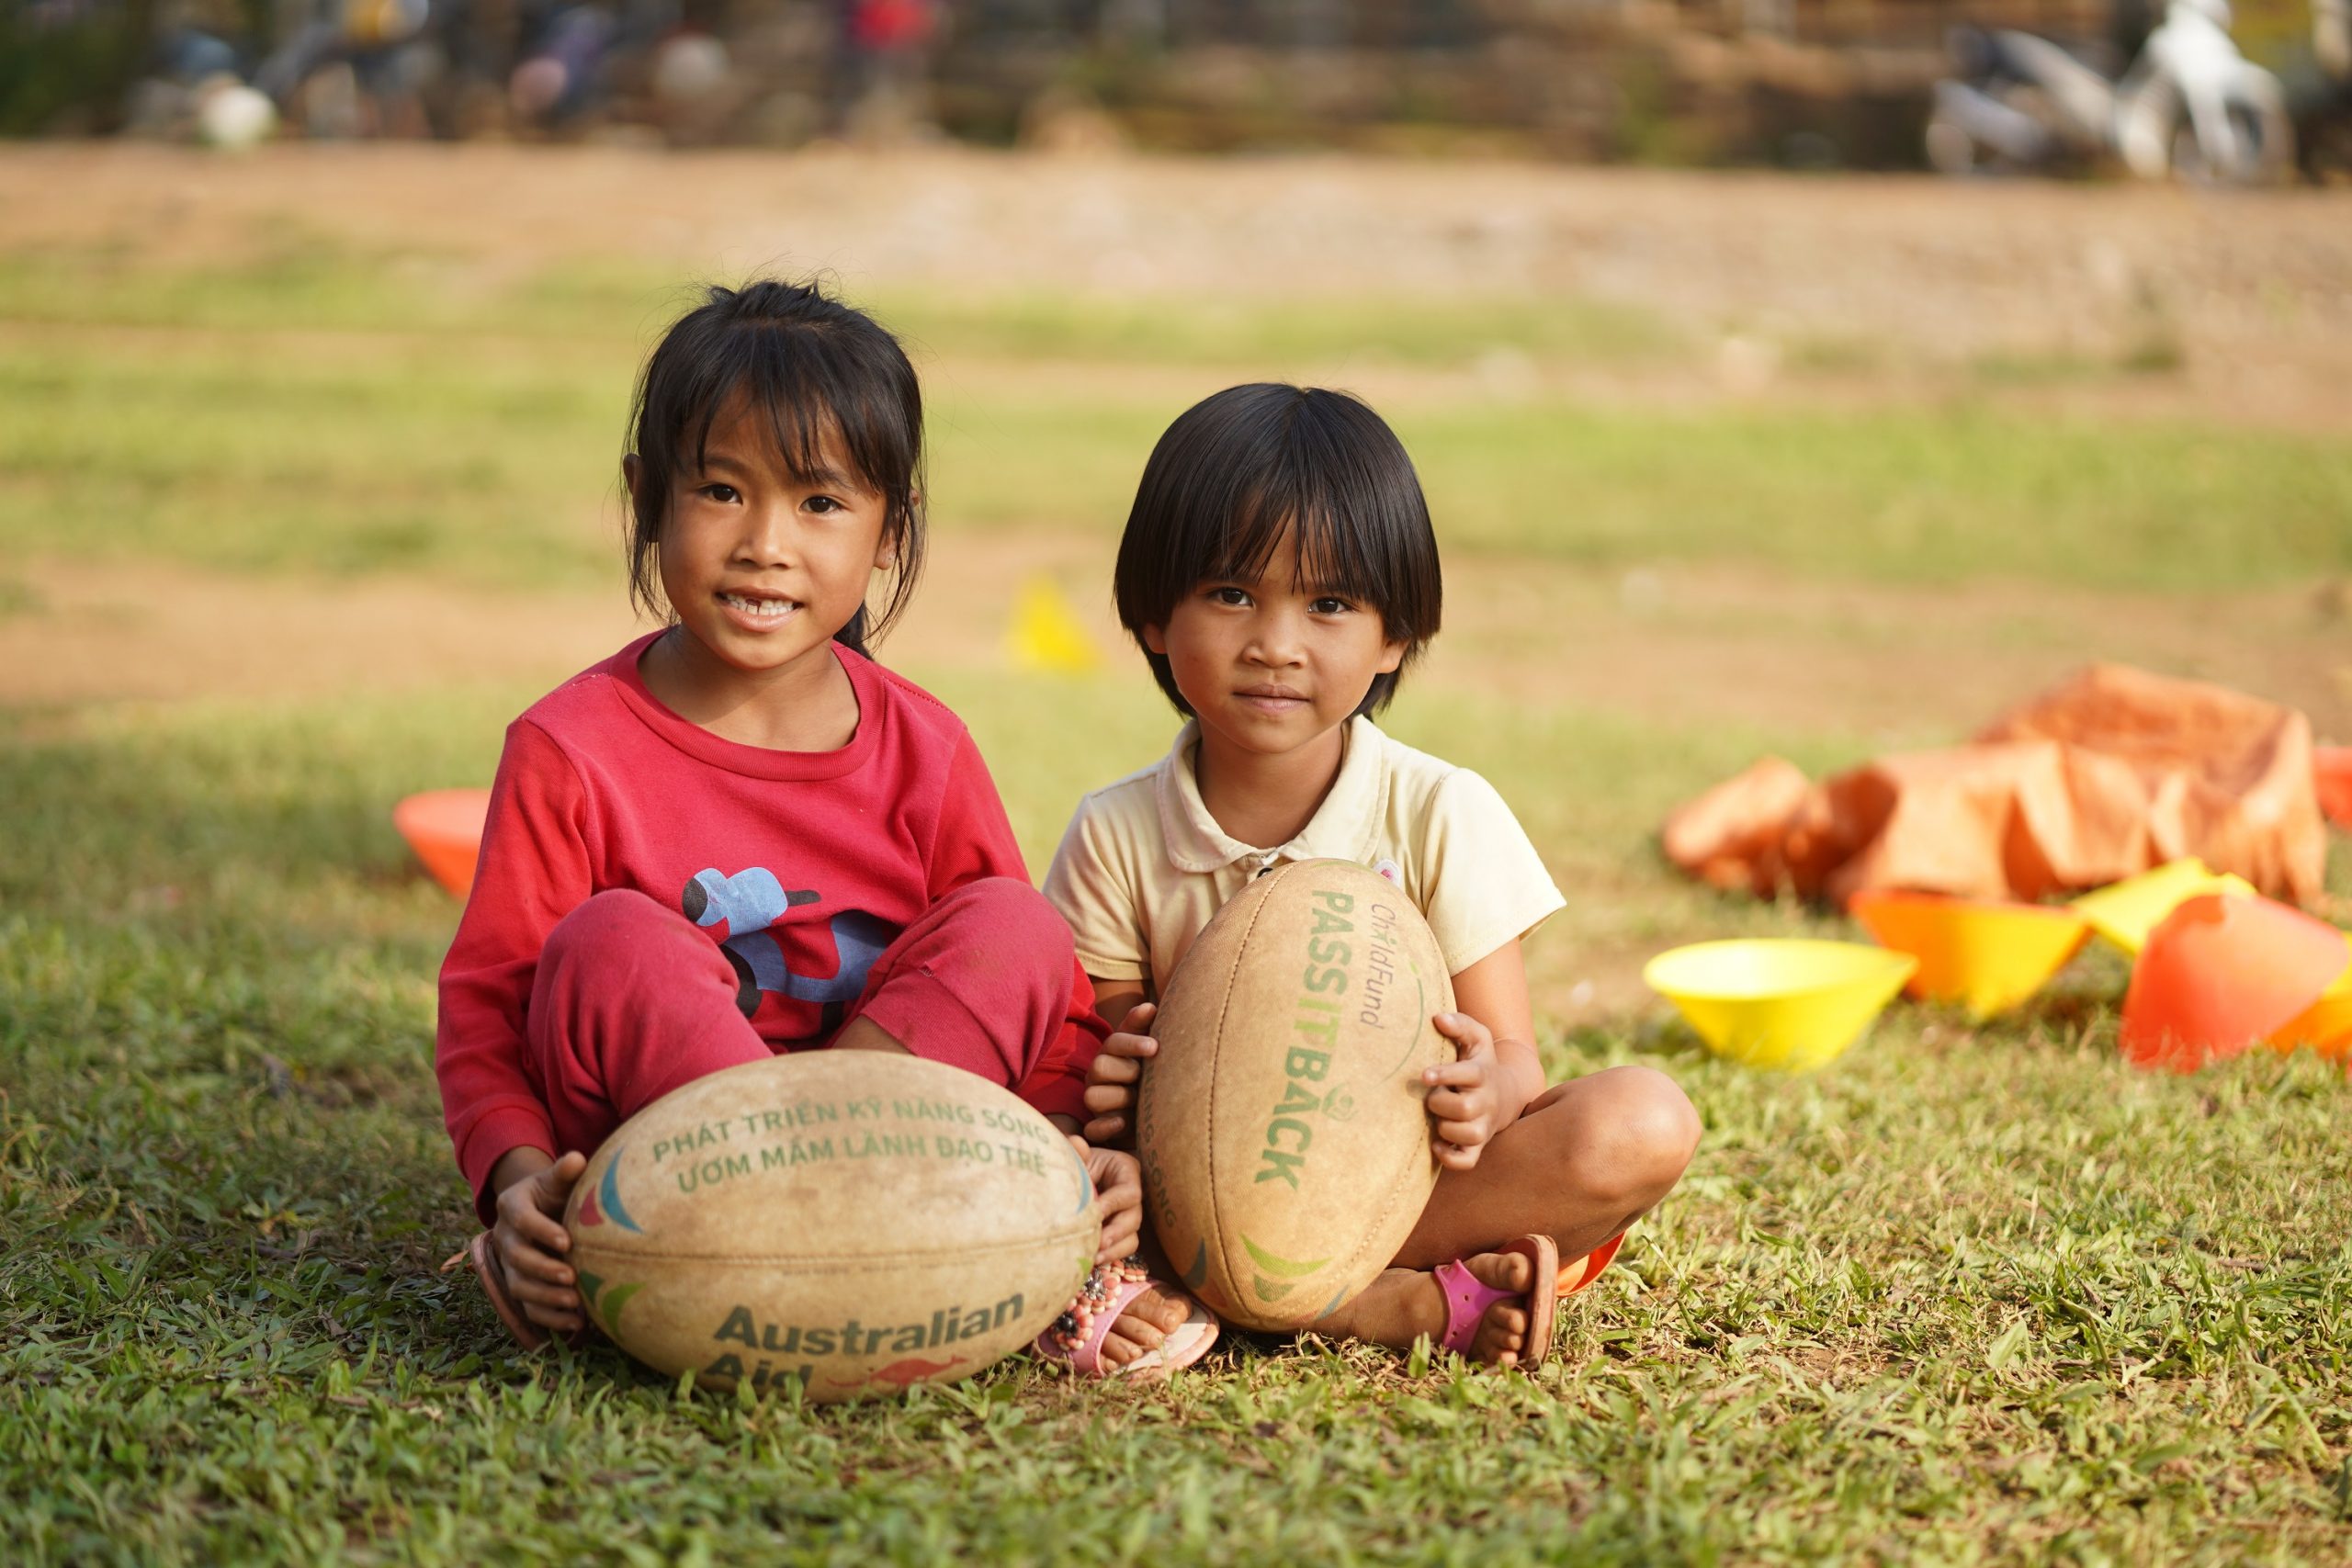 Asia’s first Rugby World Cup will leave an important and lasting legacy for tens of thousands of children in the region